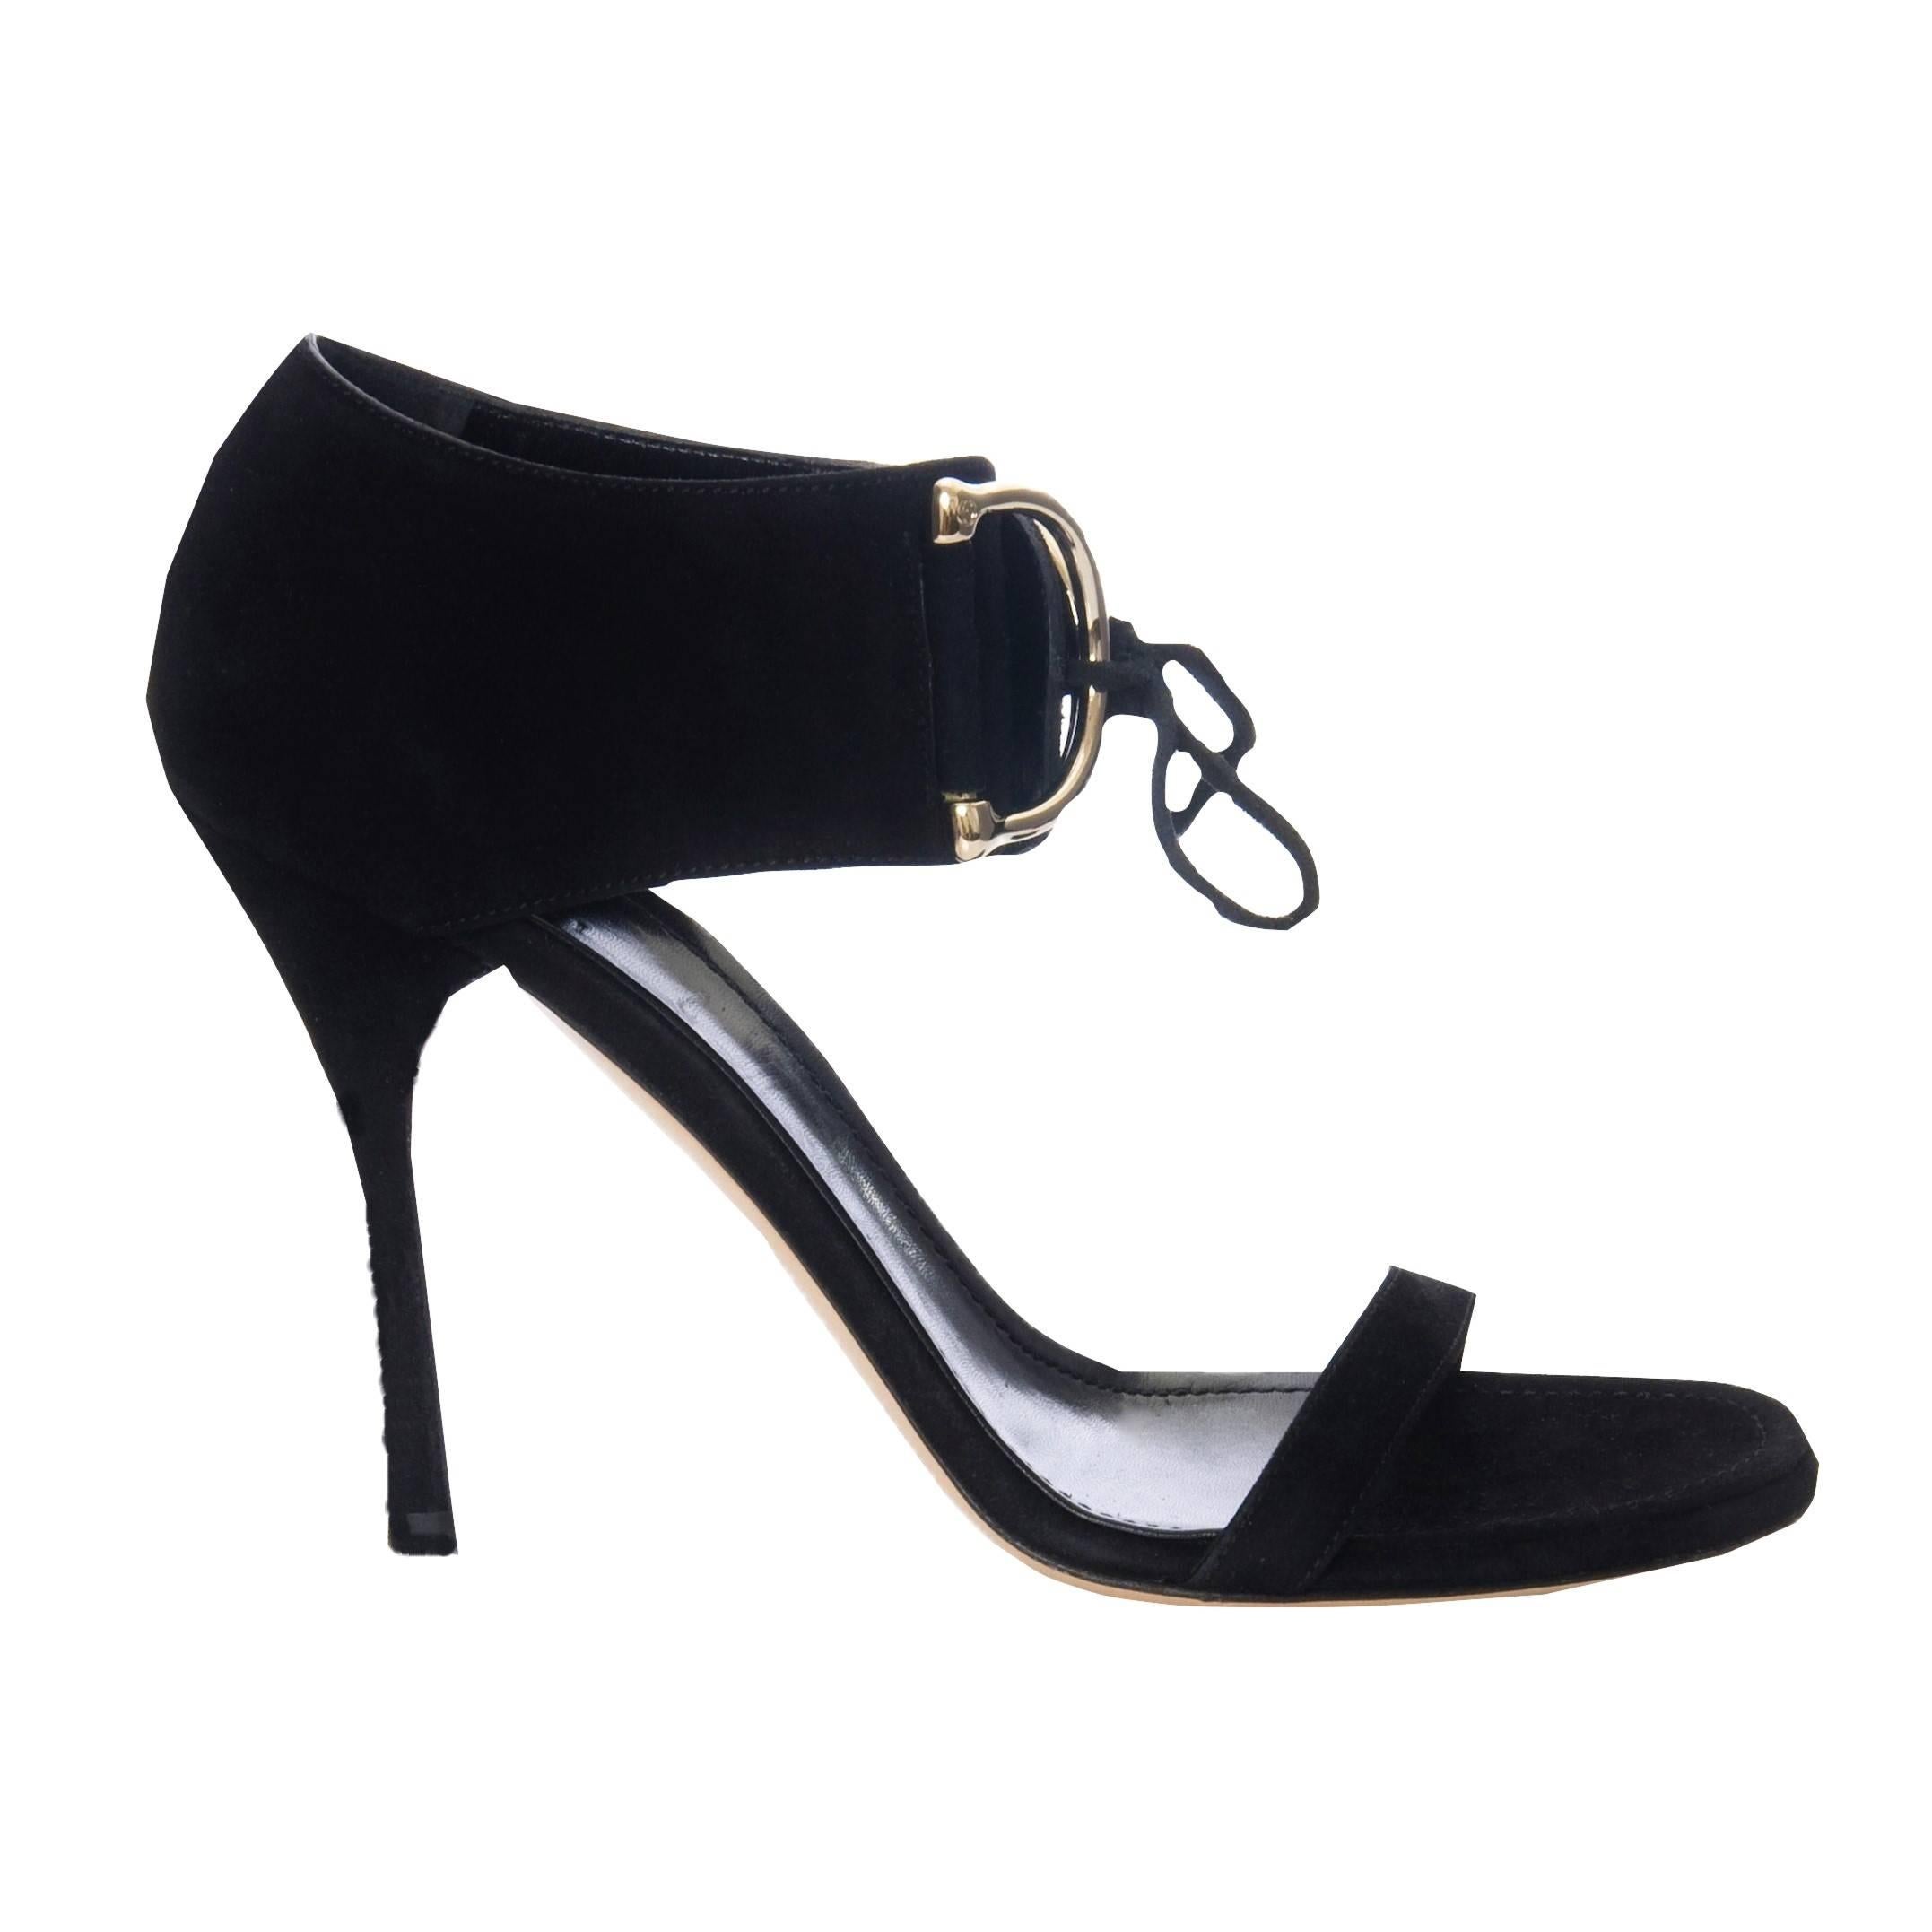 New Size 10 Tom Ford for Gucci Suede Horsebit Heels